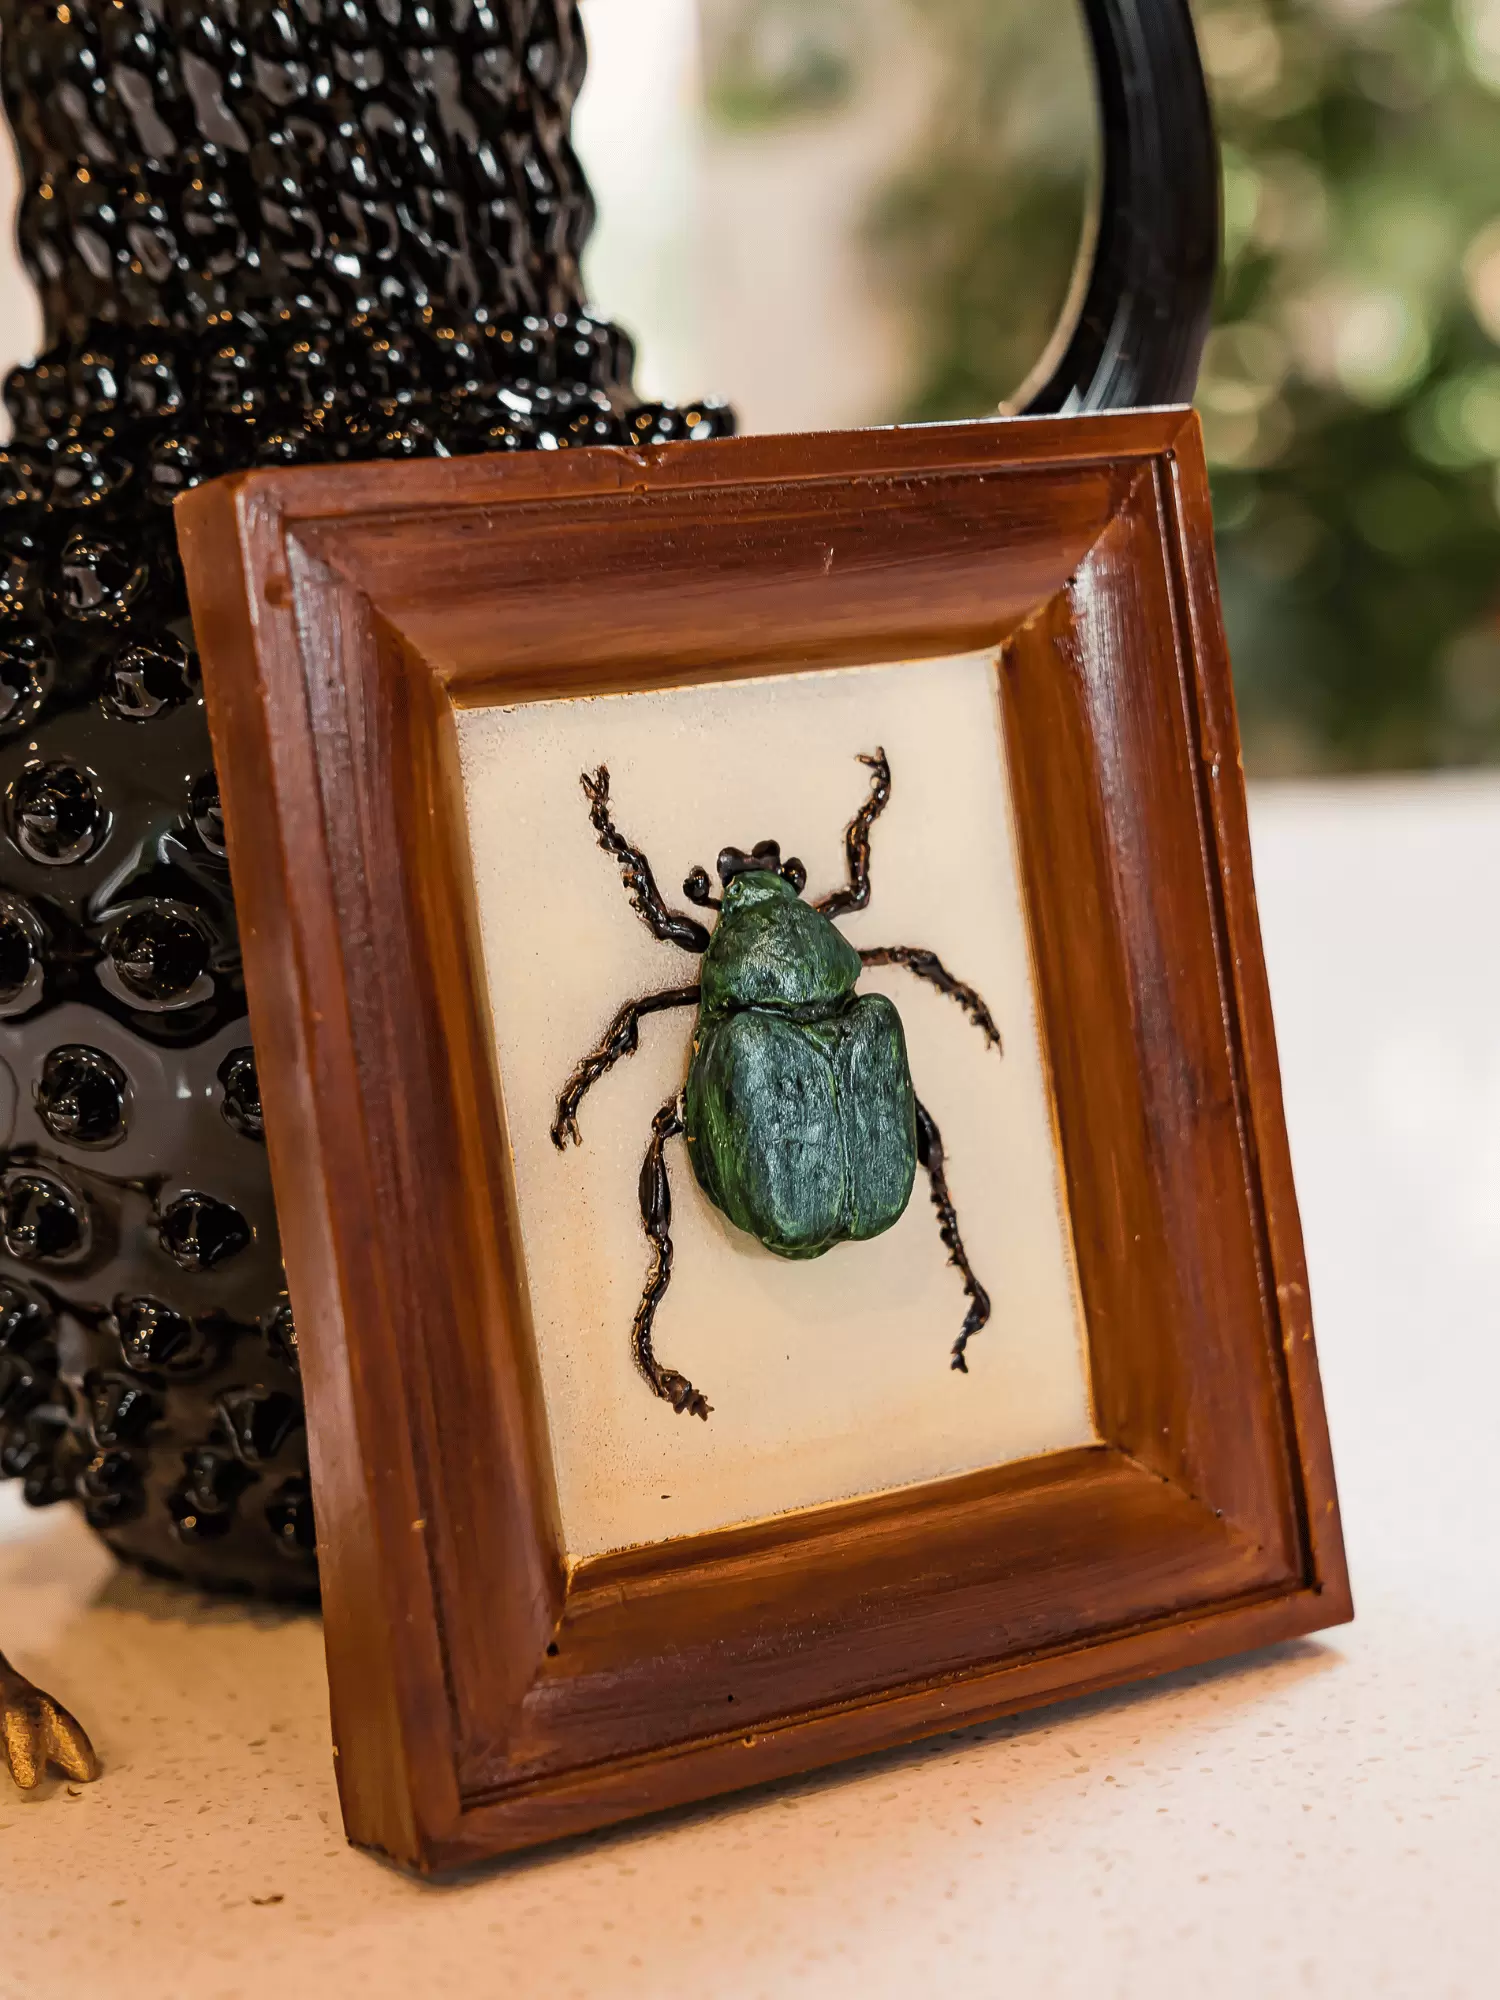 Realistic edible chocolate Chafer beetle in chocolate frame propped against an antique jug on a table